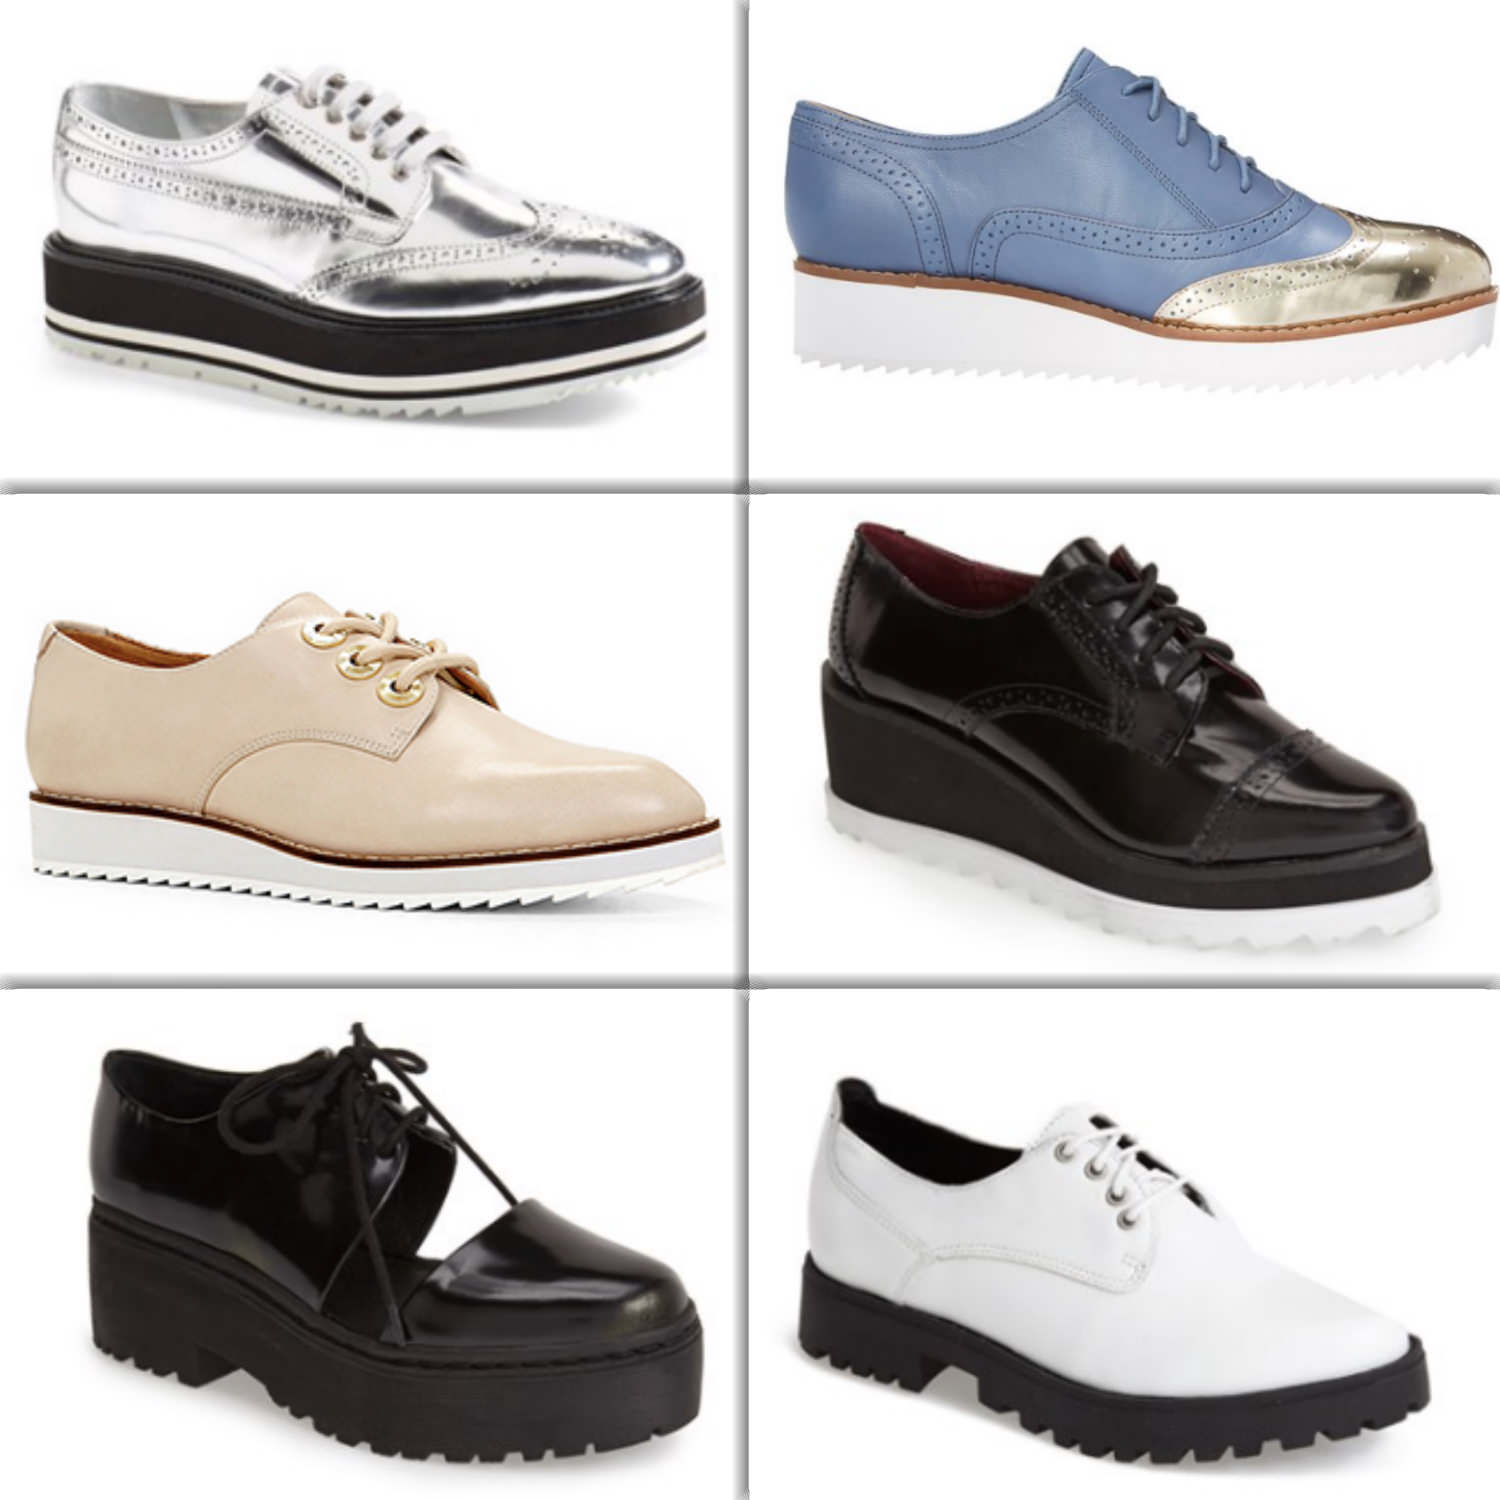 Ought Not To, Ought To: Oxfords | Truffles and Trends